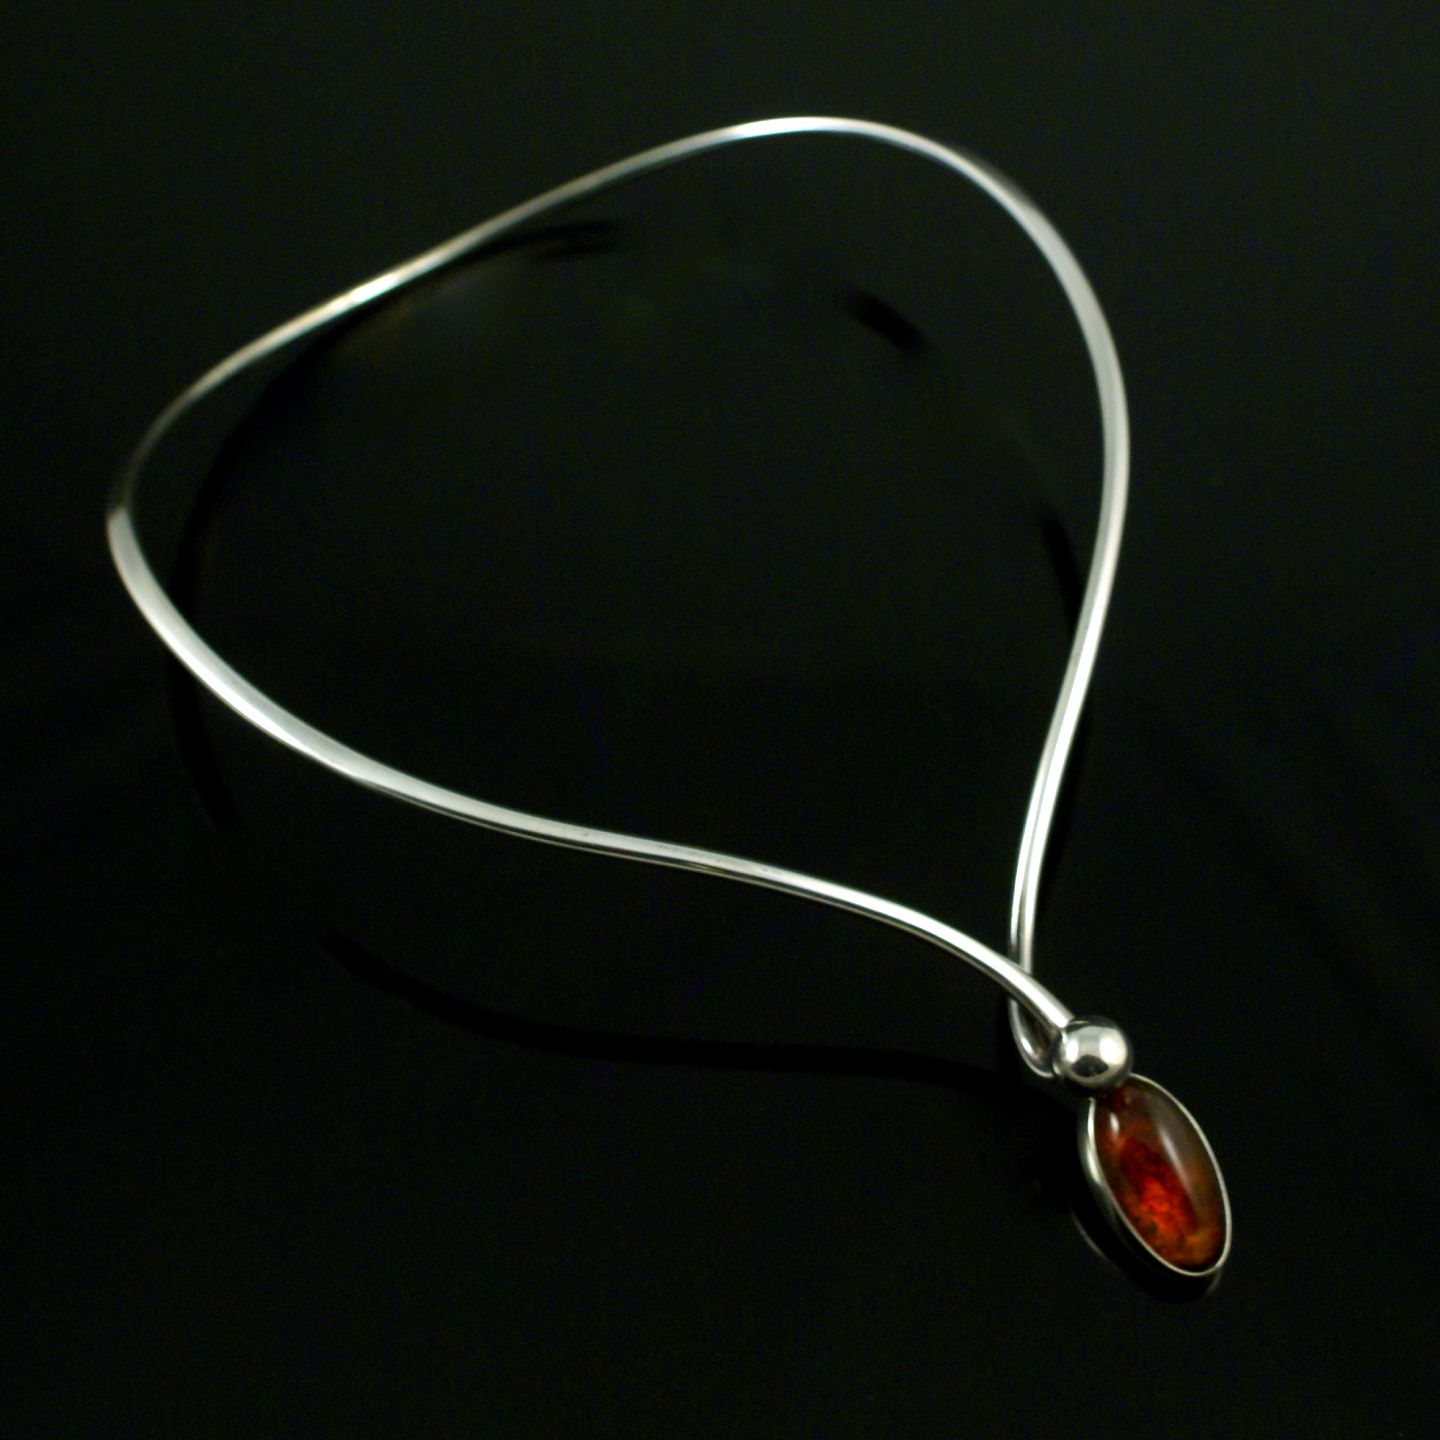 Alton Sterling Silver Neck Ring with Rock Crystal from 1973 Swedish Jewelry  | eBay